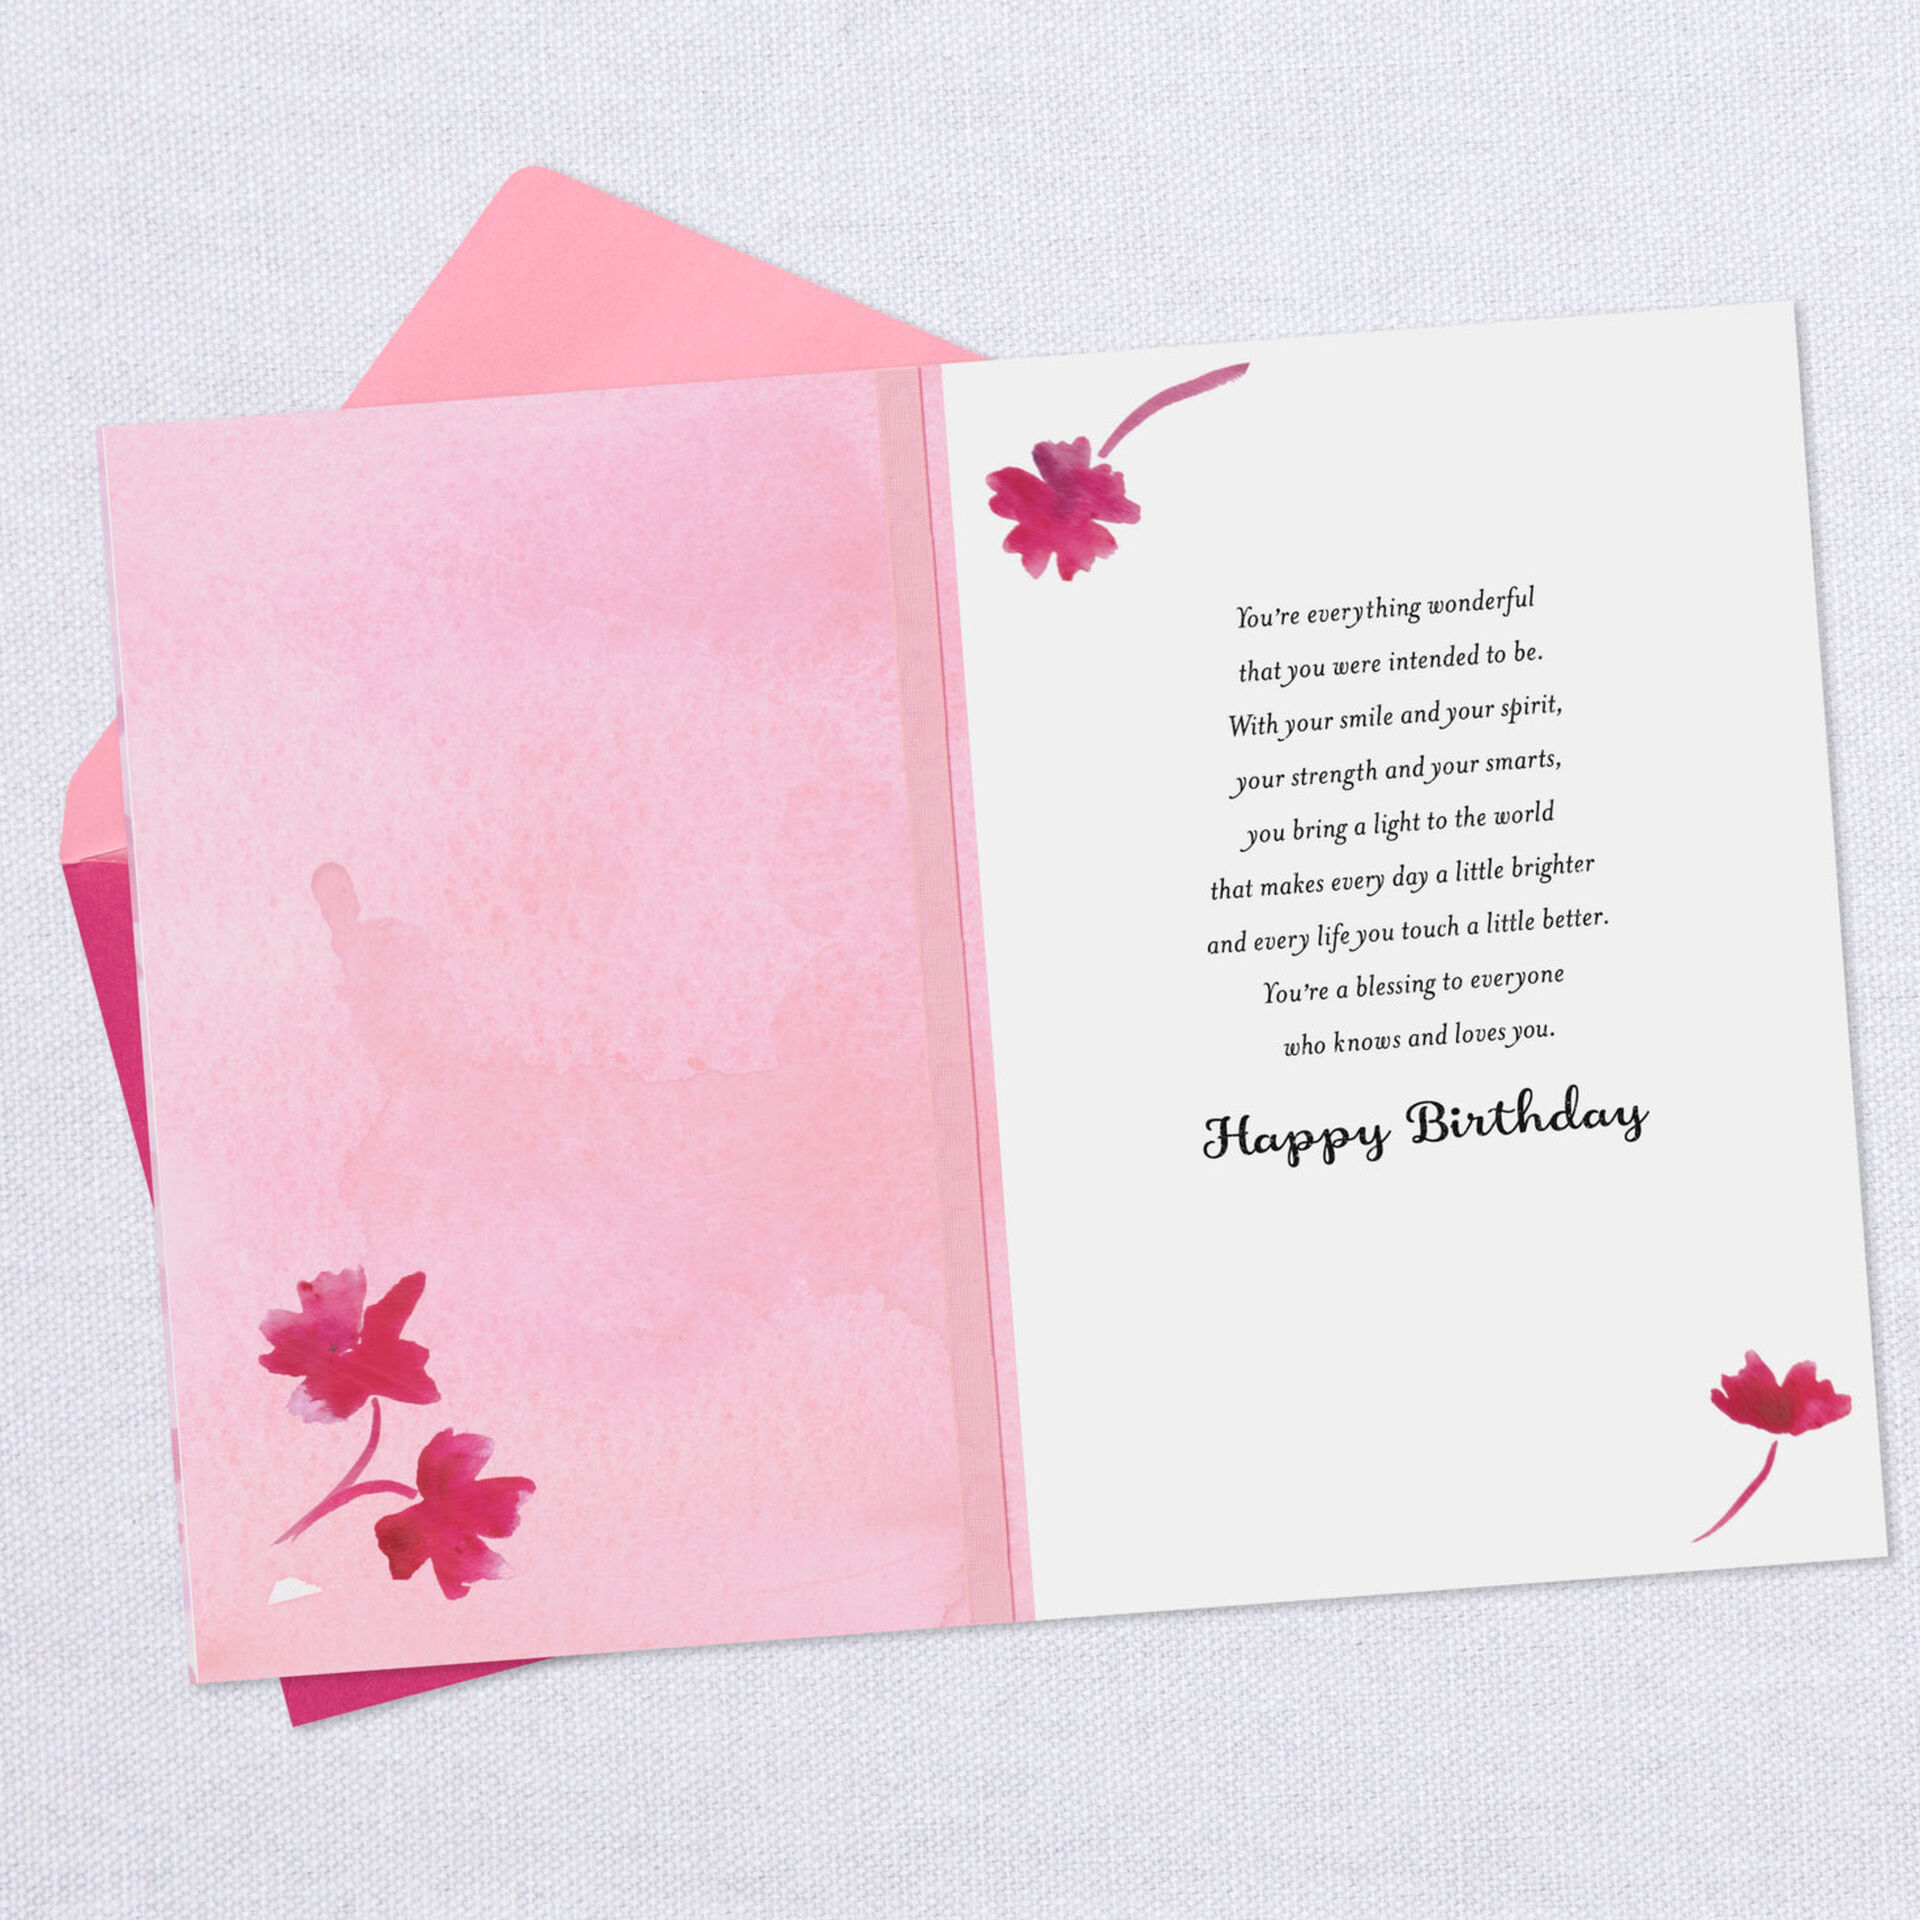 Veronica-March-Miller-Illustration-Birthday-Card-for-Her_399MHB1716_03